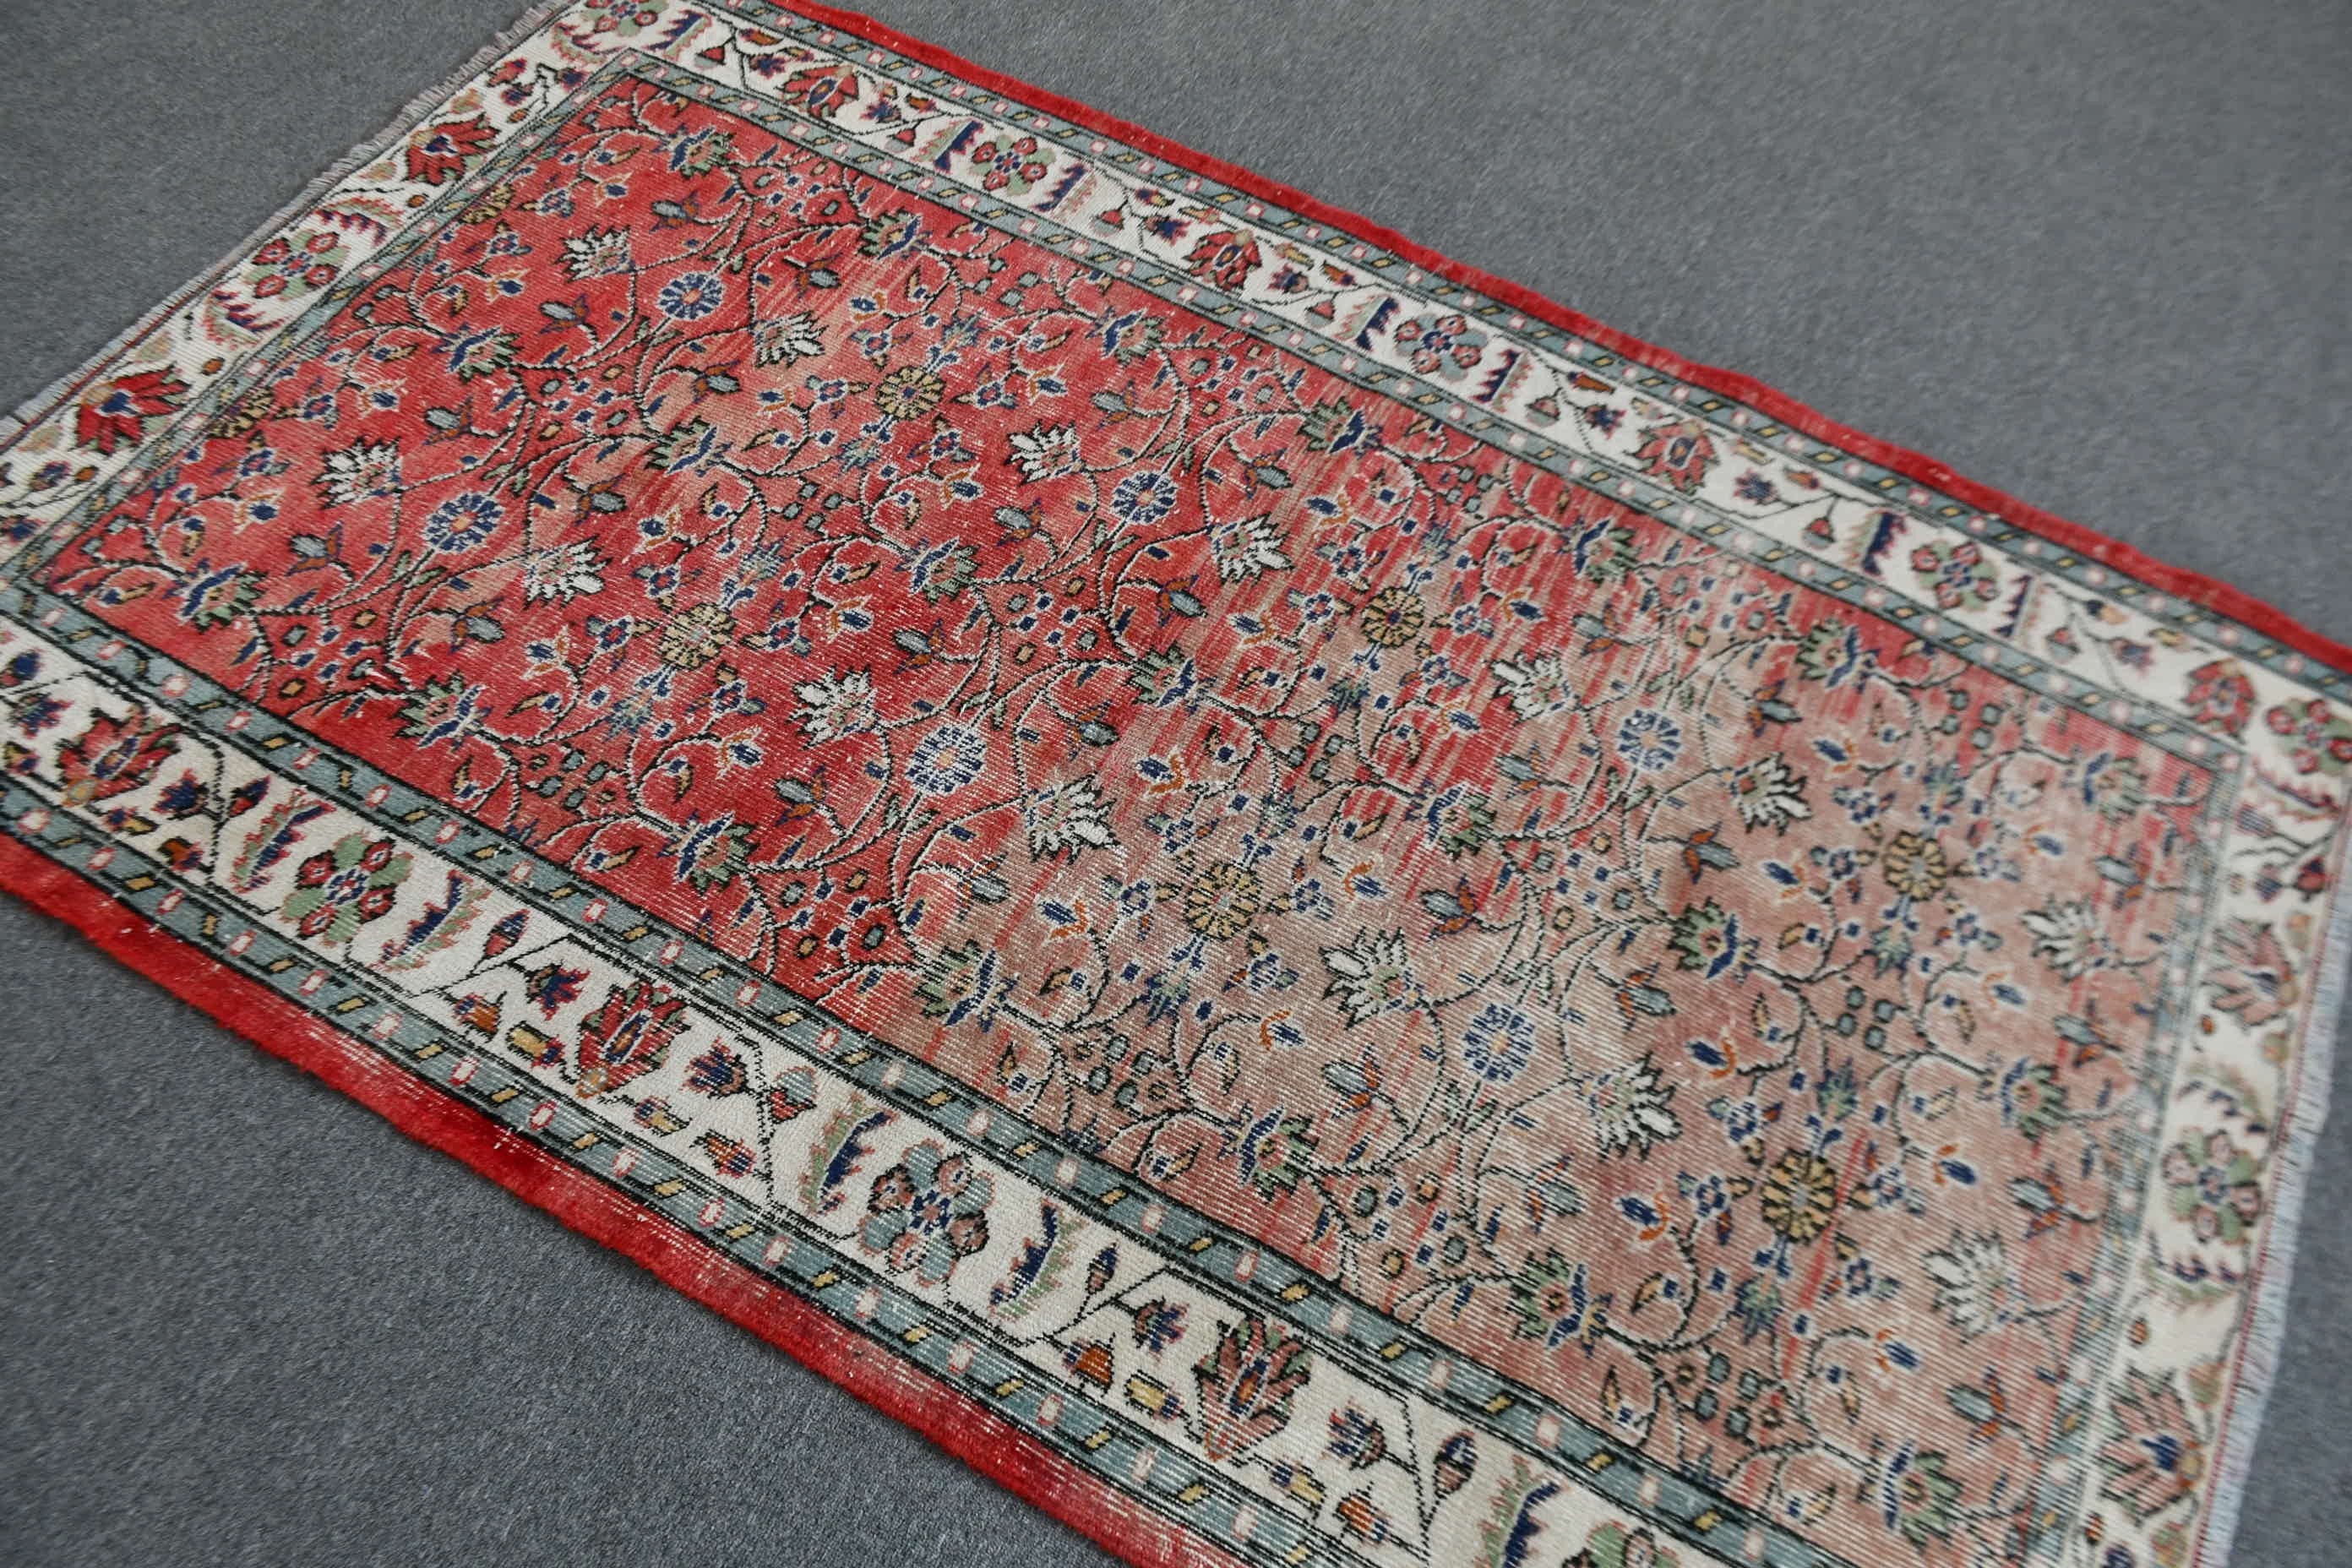 Bedroom Rugs, Red Antique Rugs, Rugs for Kitchen, Vintage Rugs, Kitchen Rug, 4.2x6.7 ft Area Rug, Turkish Rug, Nursery Rugs